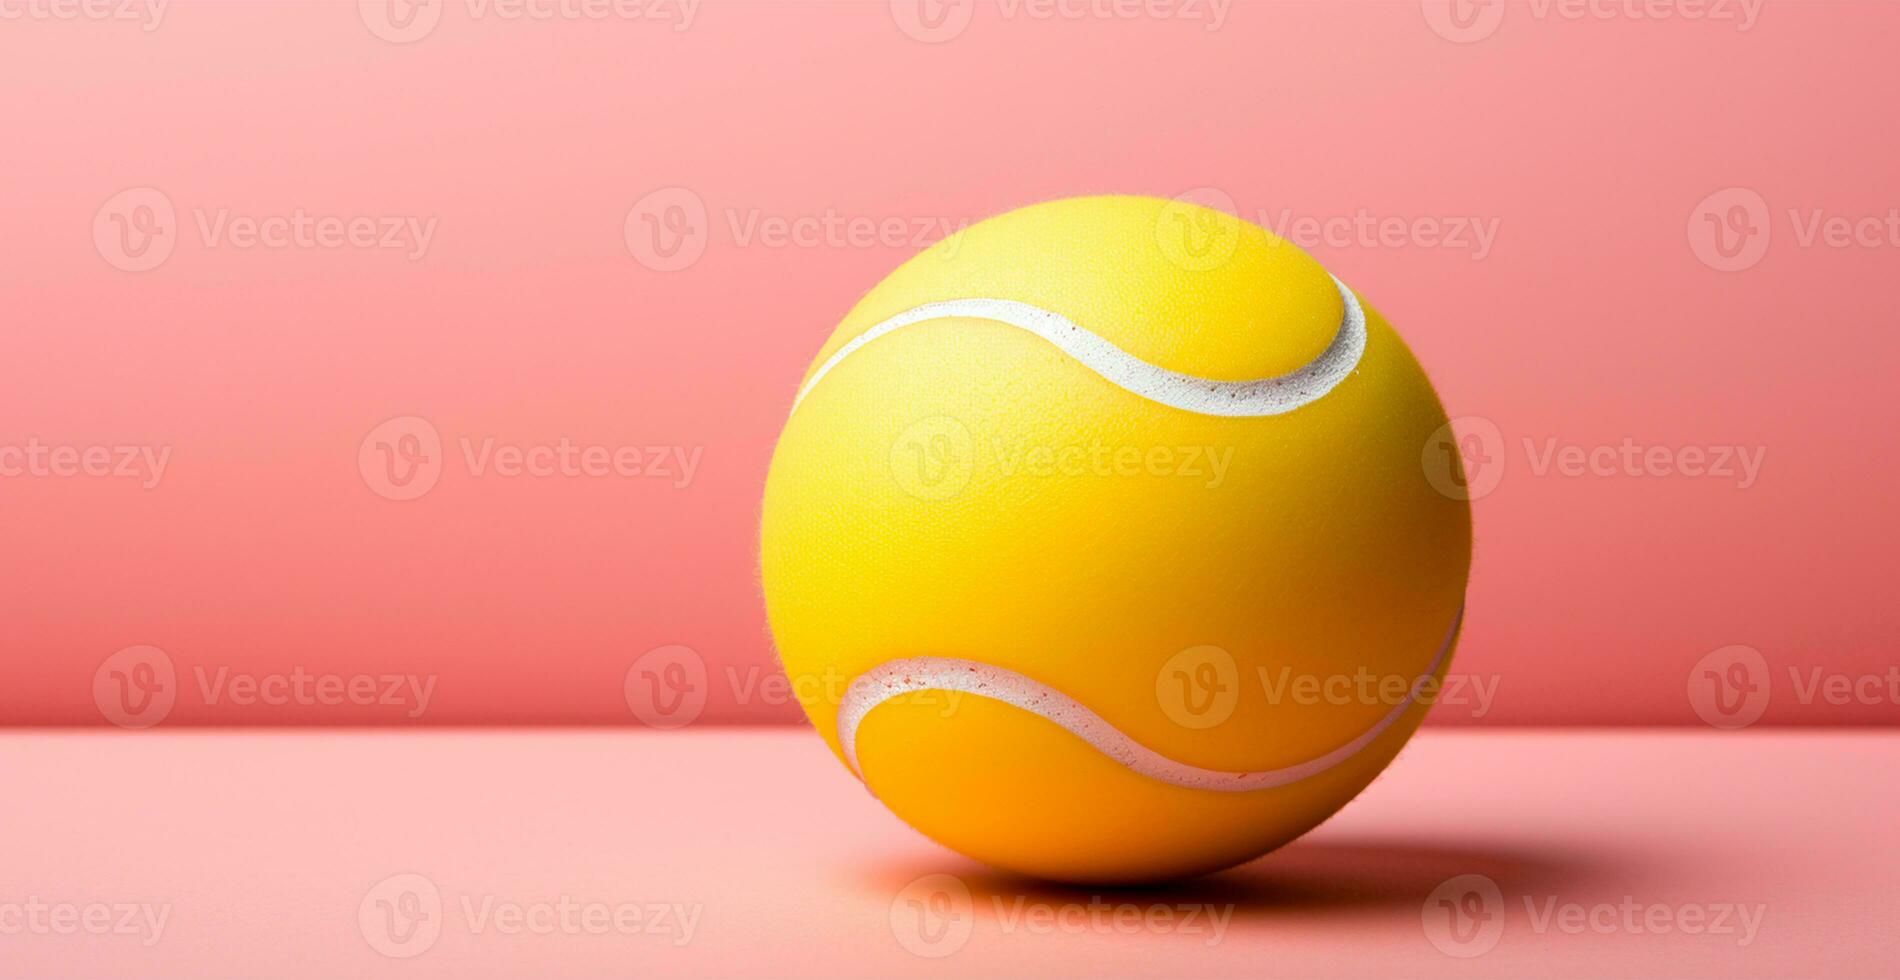 AI generated Yellow tennis ball on isolated background - AI generated image photo